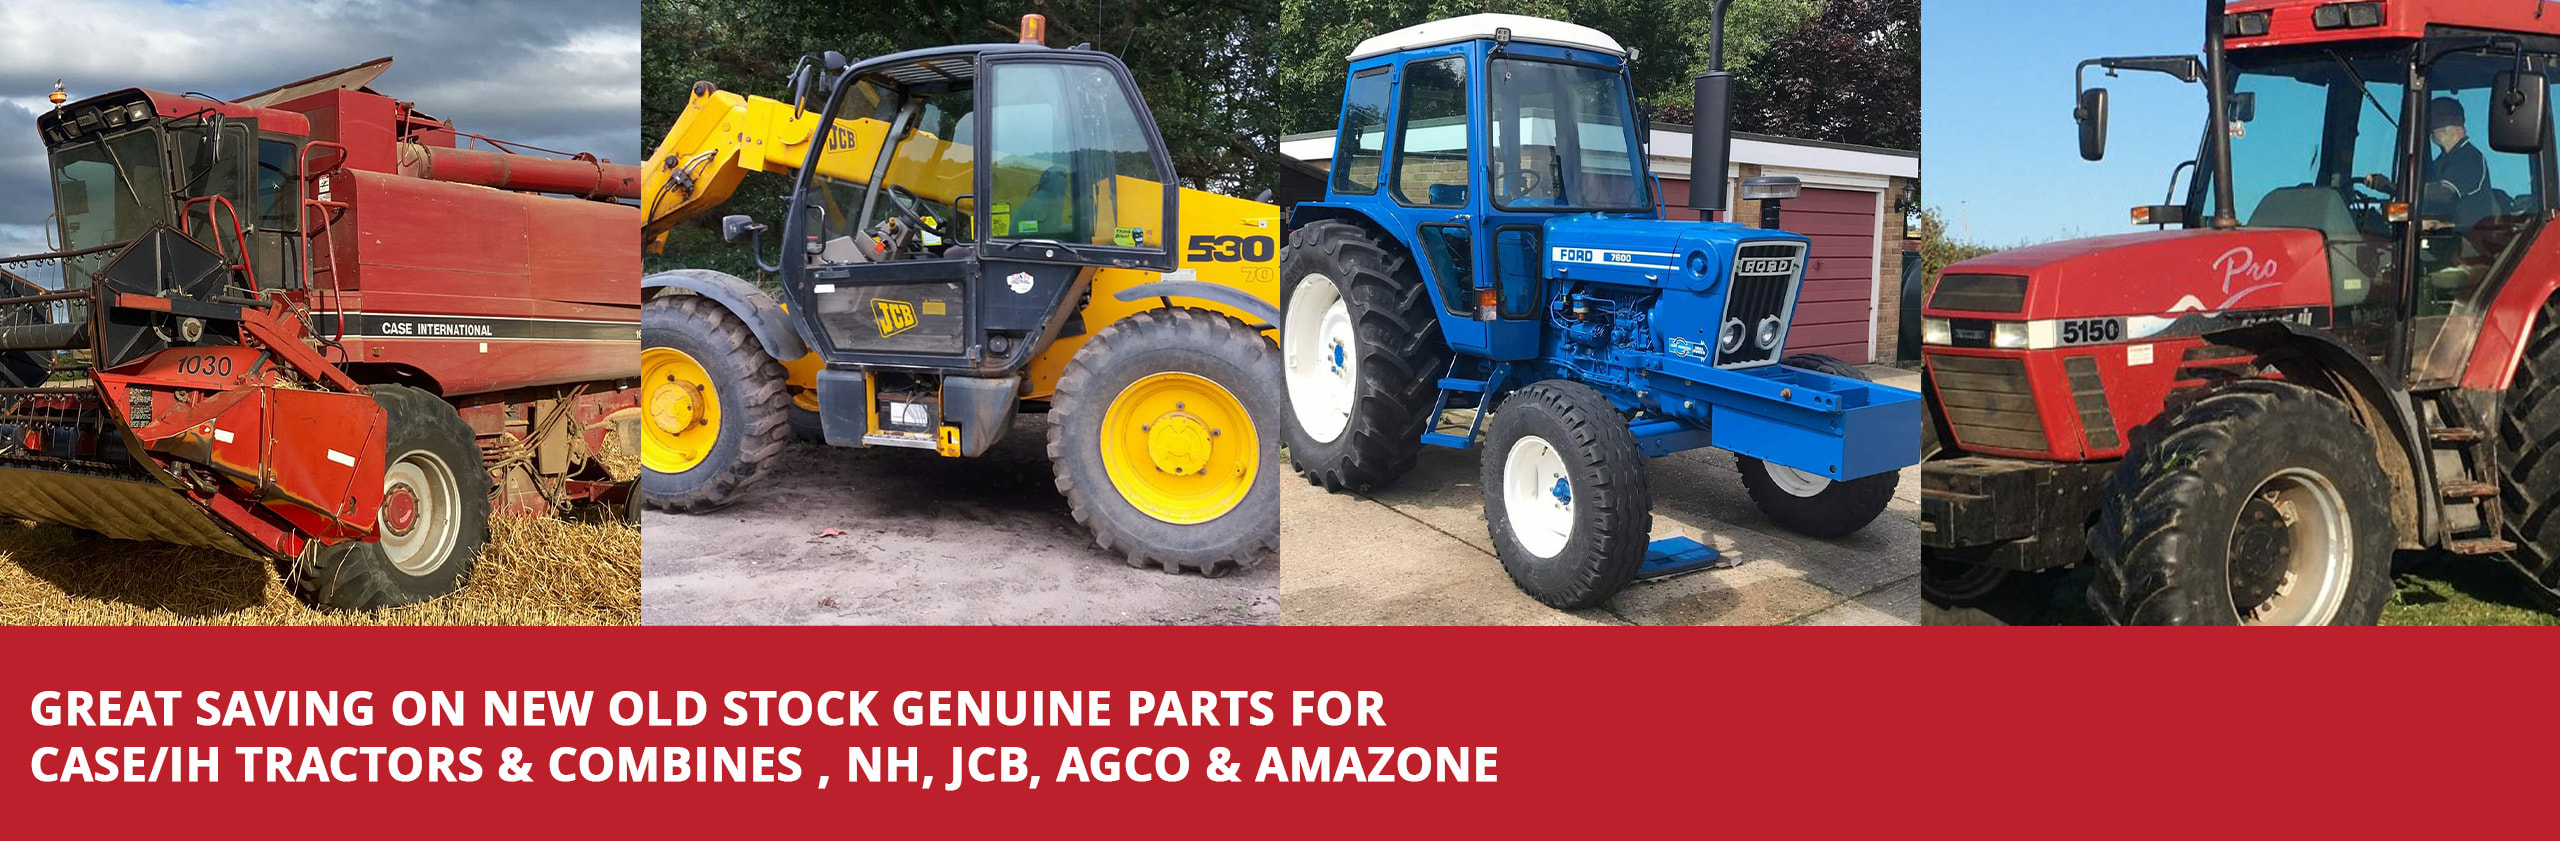 Great Saving on new old stock genuine parts for Case/IH Tractors & Combines , NH, JCB, Agco & Amazone